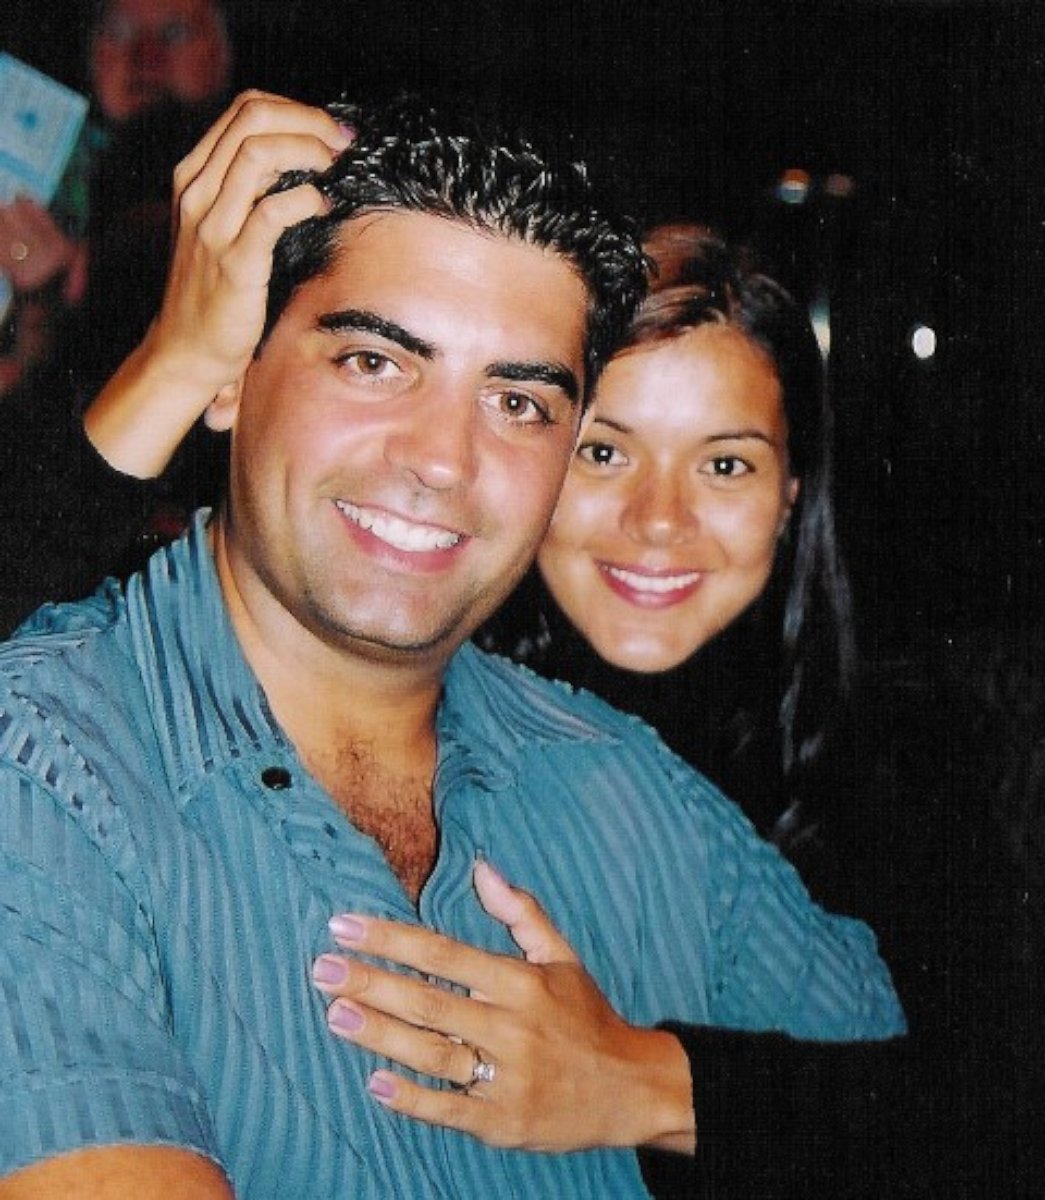 Tanya Villanueva Tepper photographed with her fiance, Sergio Villanueva, in late August 2001. Sergio was a firefighter for Ladder #132 in Brooklyn. It is believed Sergio was last seen in the Marriott Hotel when the towers collapsed on Sept. 11, 2001.